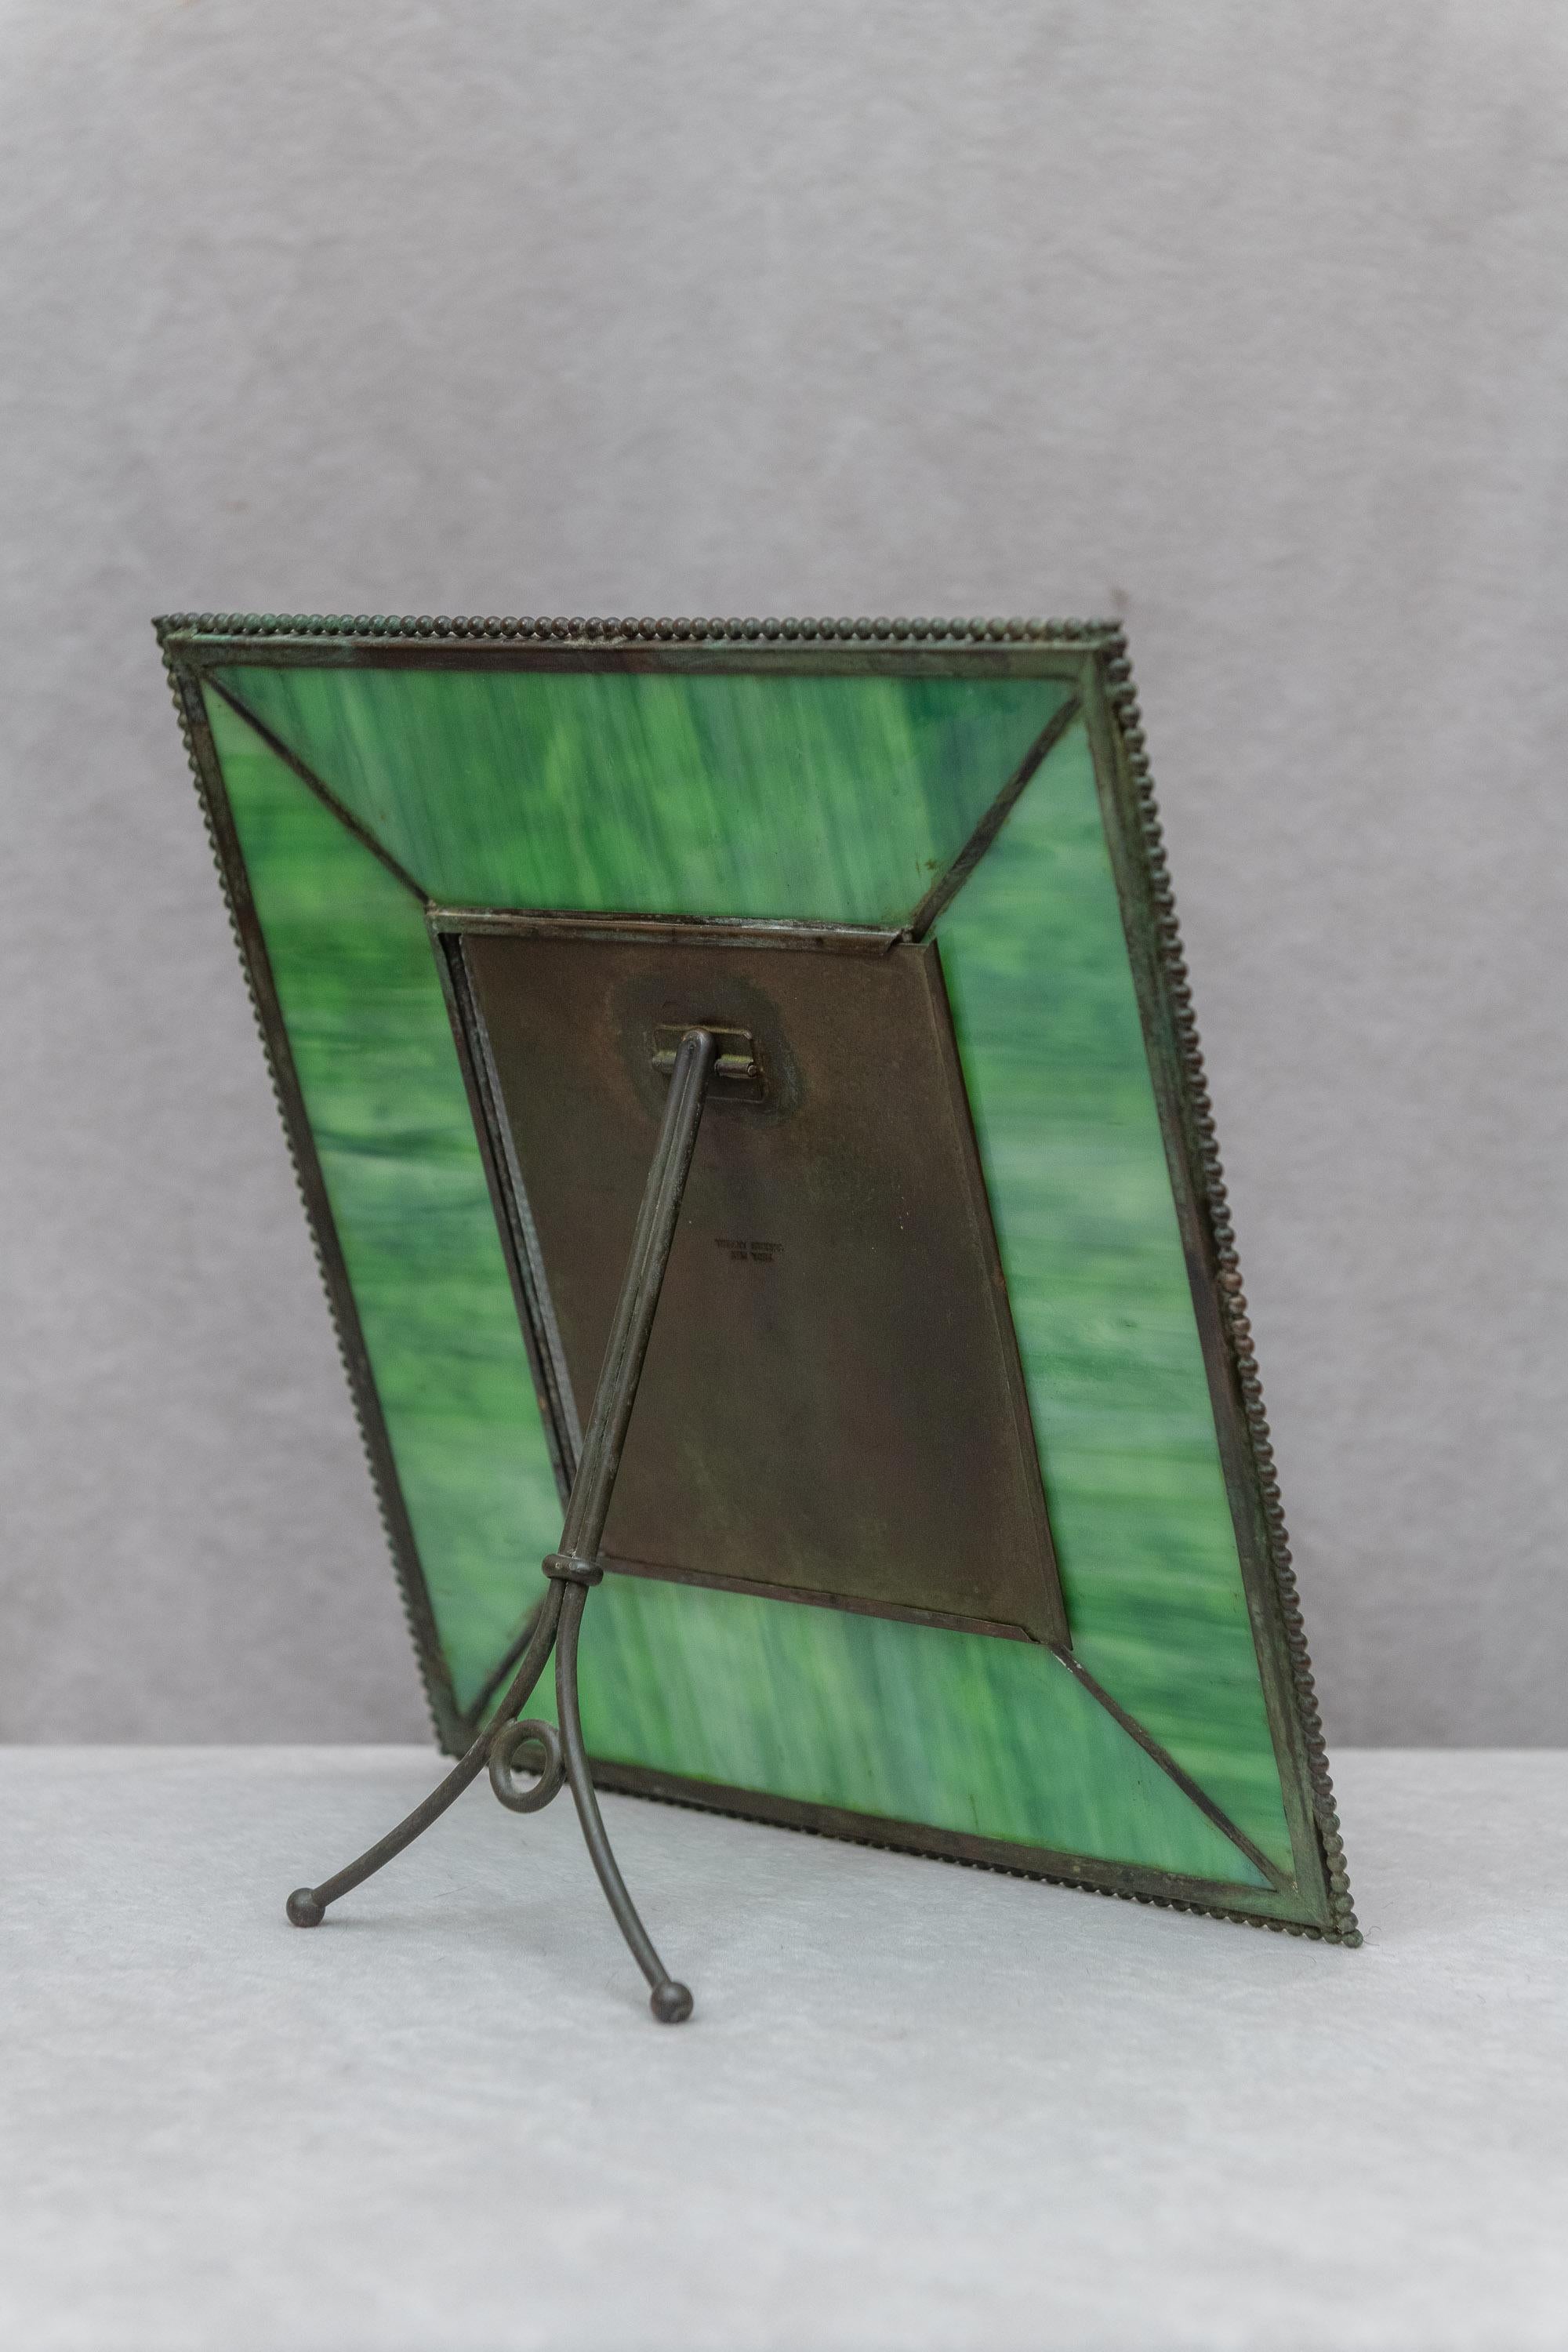 This is an original signed Tiffany Studios grapevine pattern picture frame. Please note the rich green background glass. We did light up the glass in some of our photos, and you can certainly do the same when you get it home. A very desirable and